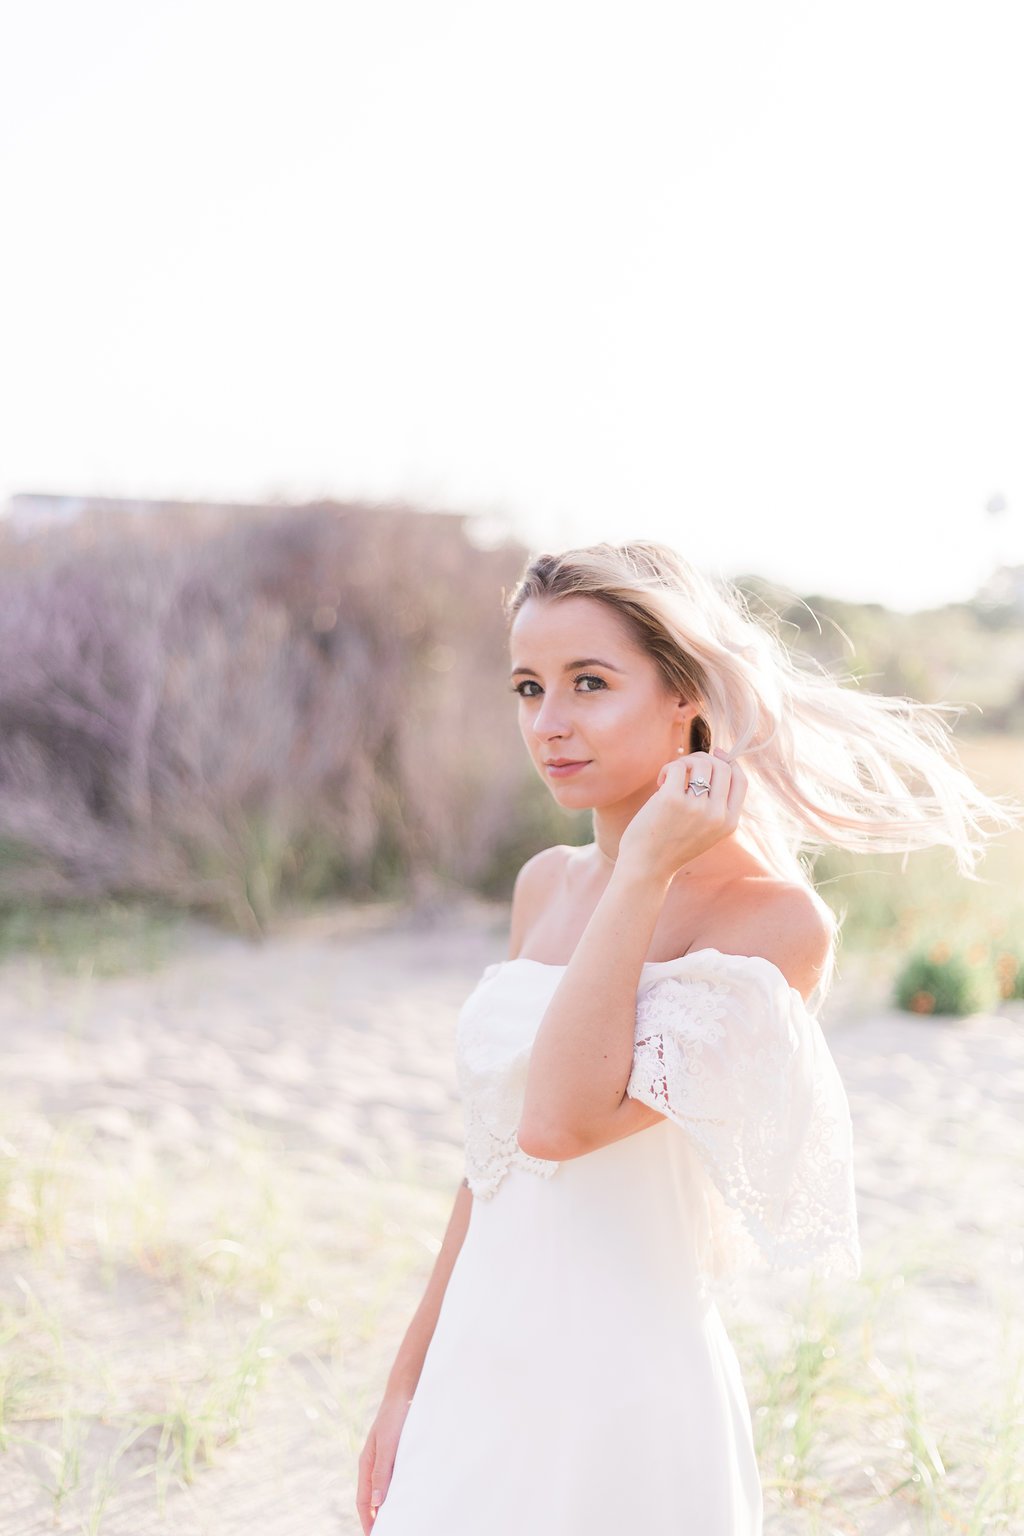 savannah-bridal-shop-last-minute-wedding-planning-details-you-should-start-on-NOW-bluebell-photography-daughters-of-simone-tybee-island-wedding-11.jpg